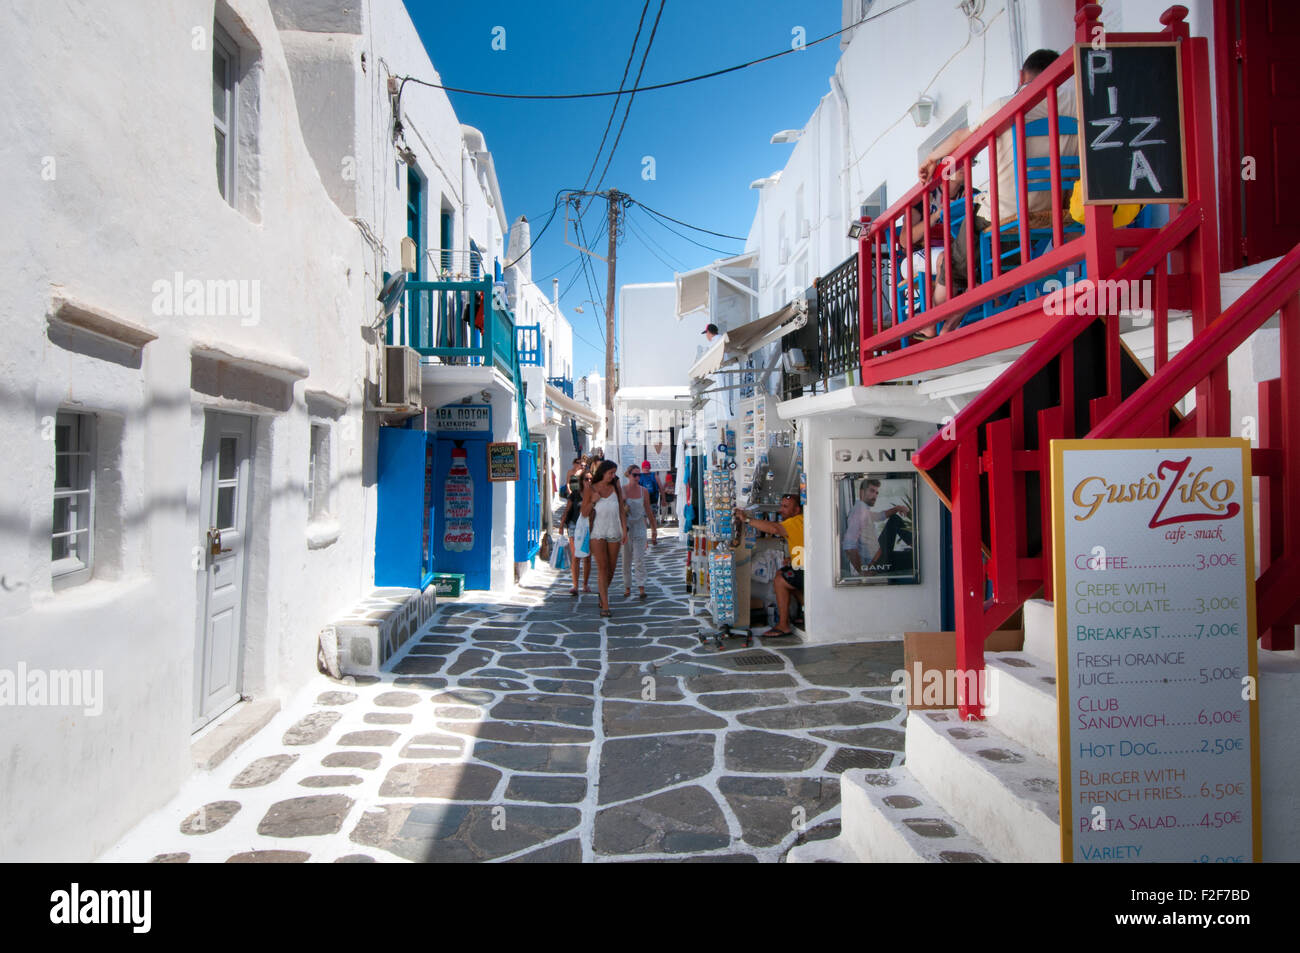 Mykonos Shopping Street High Resolution Stock Photography and Images - Alamy